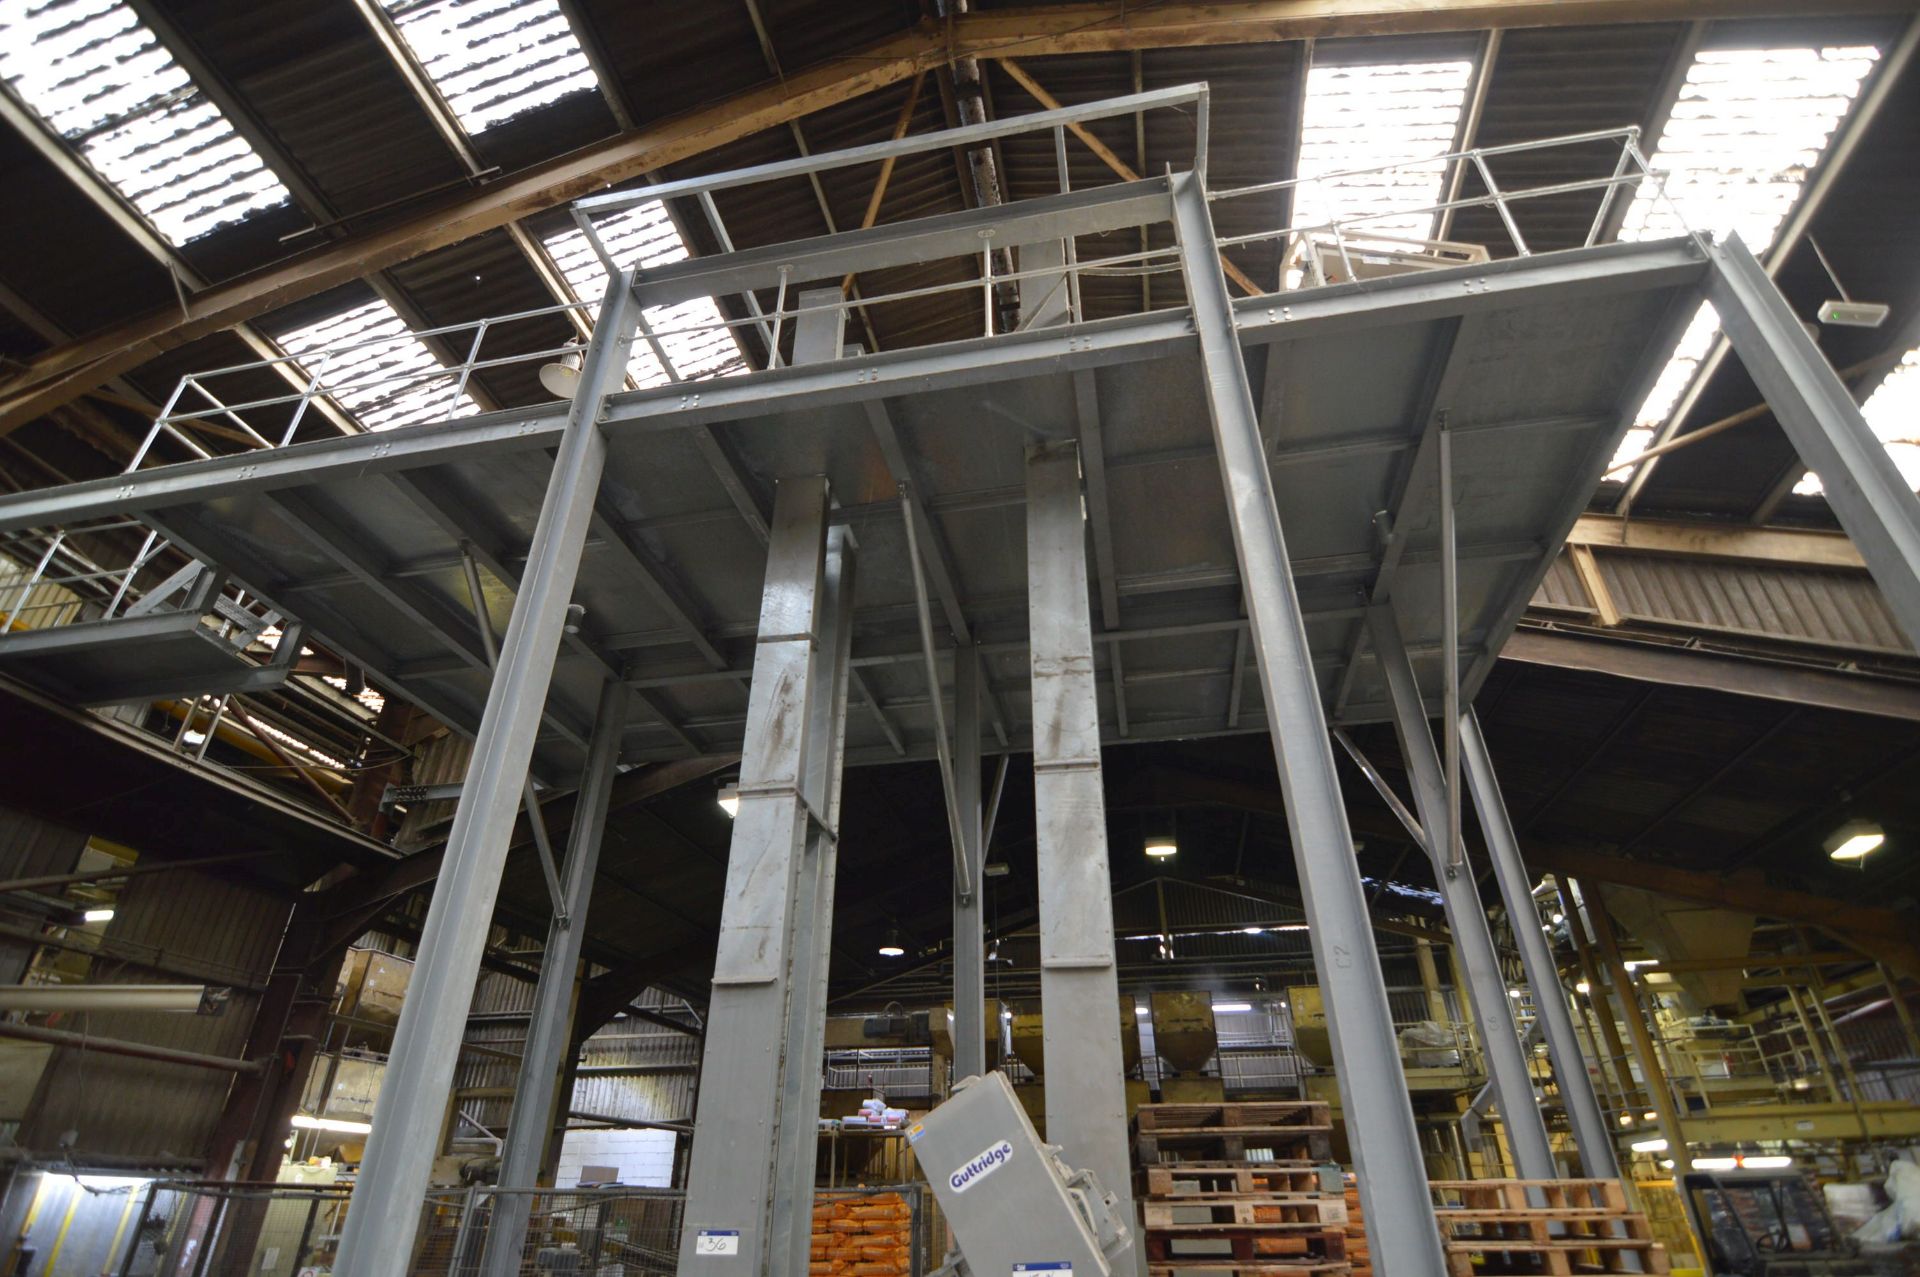 BOLTED SECTIONAL GALVANISED STEEL MEZZANINE FLOOR/ PLANT ENTABLATURE, approx. 11m x 6m x 6.6m - Image 3 of 3